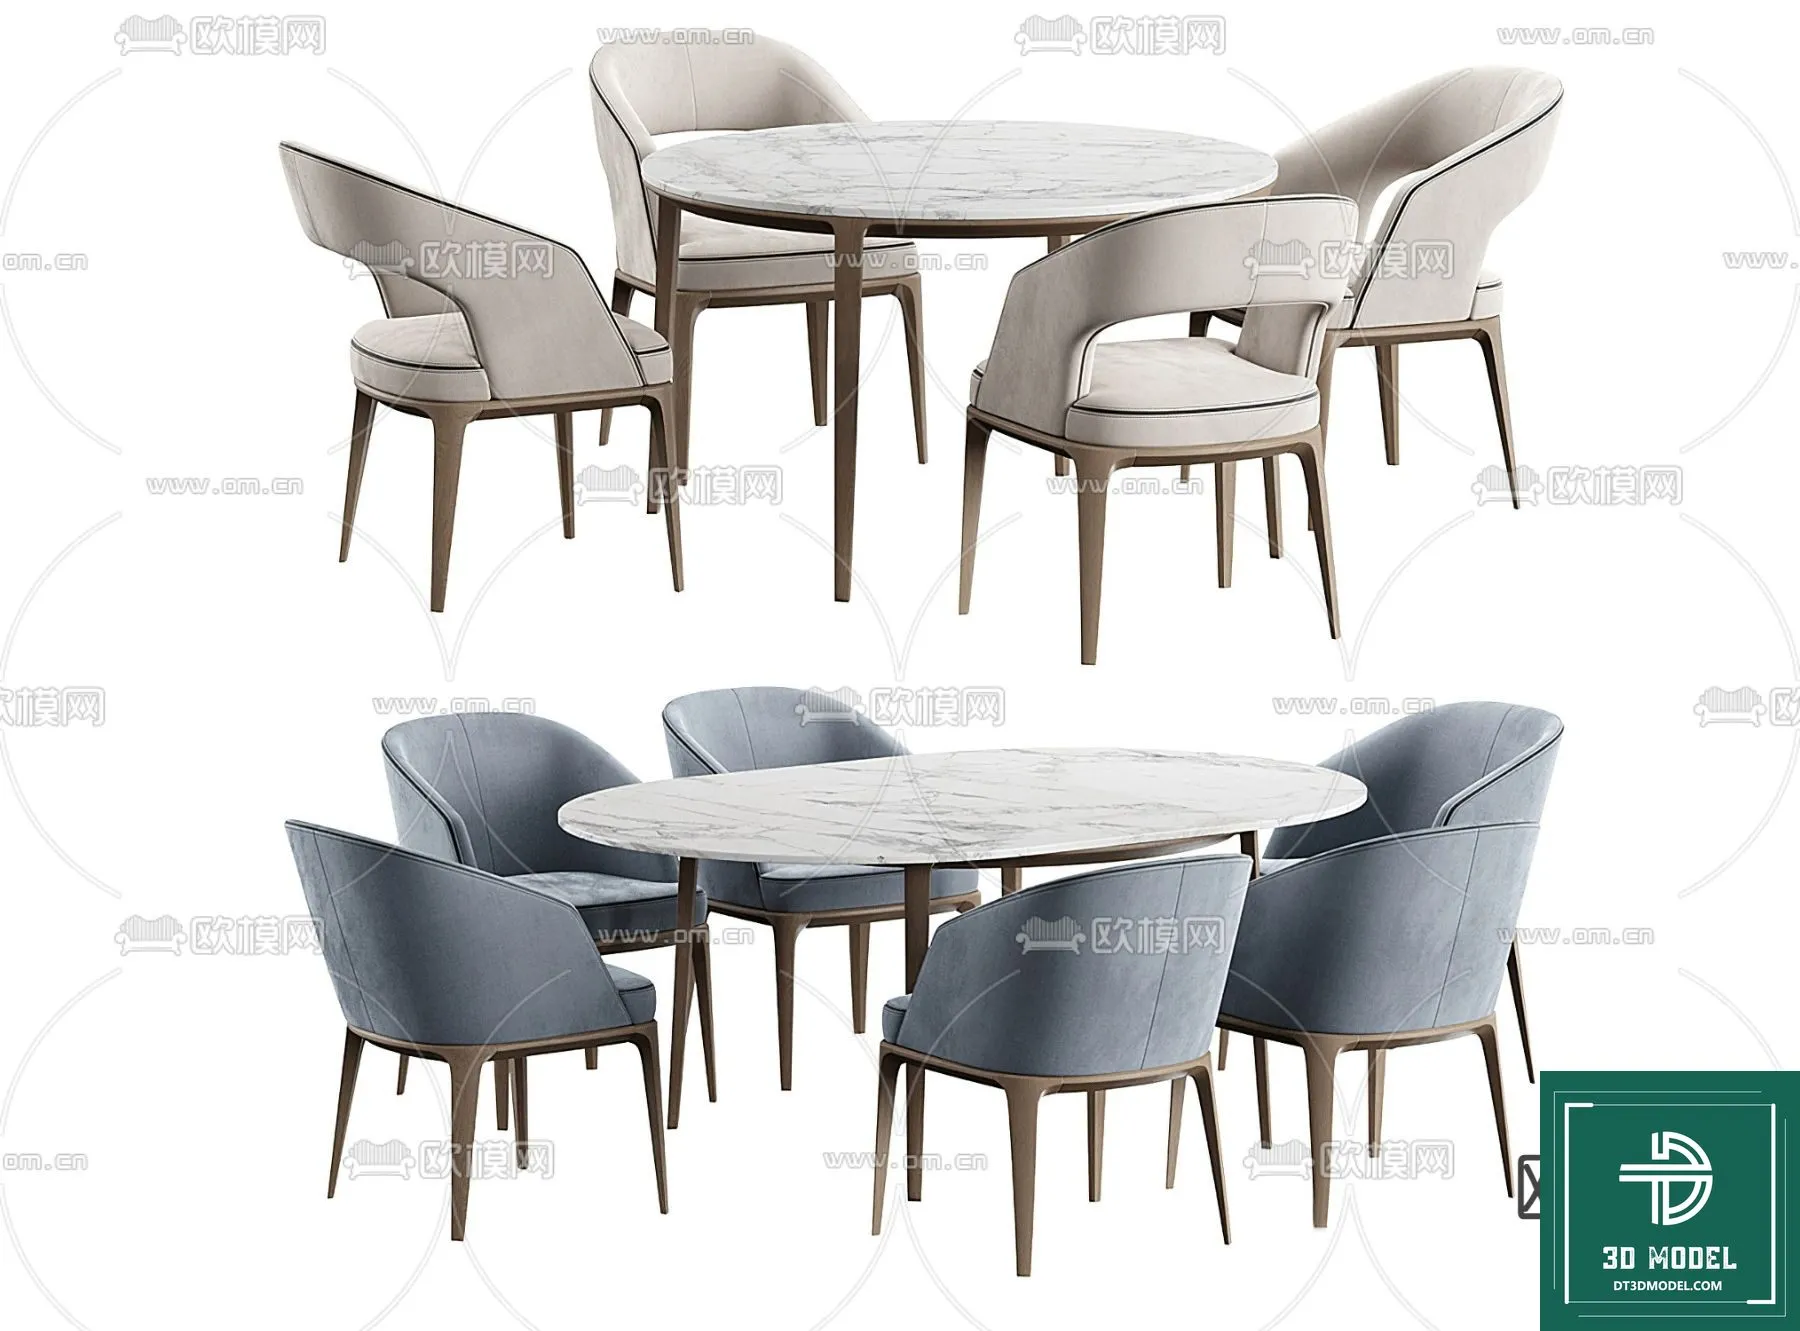 LUXURY – 3D Models – DINING TABLE SETS – 034